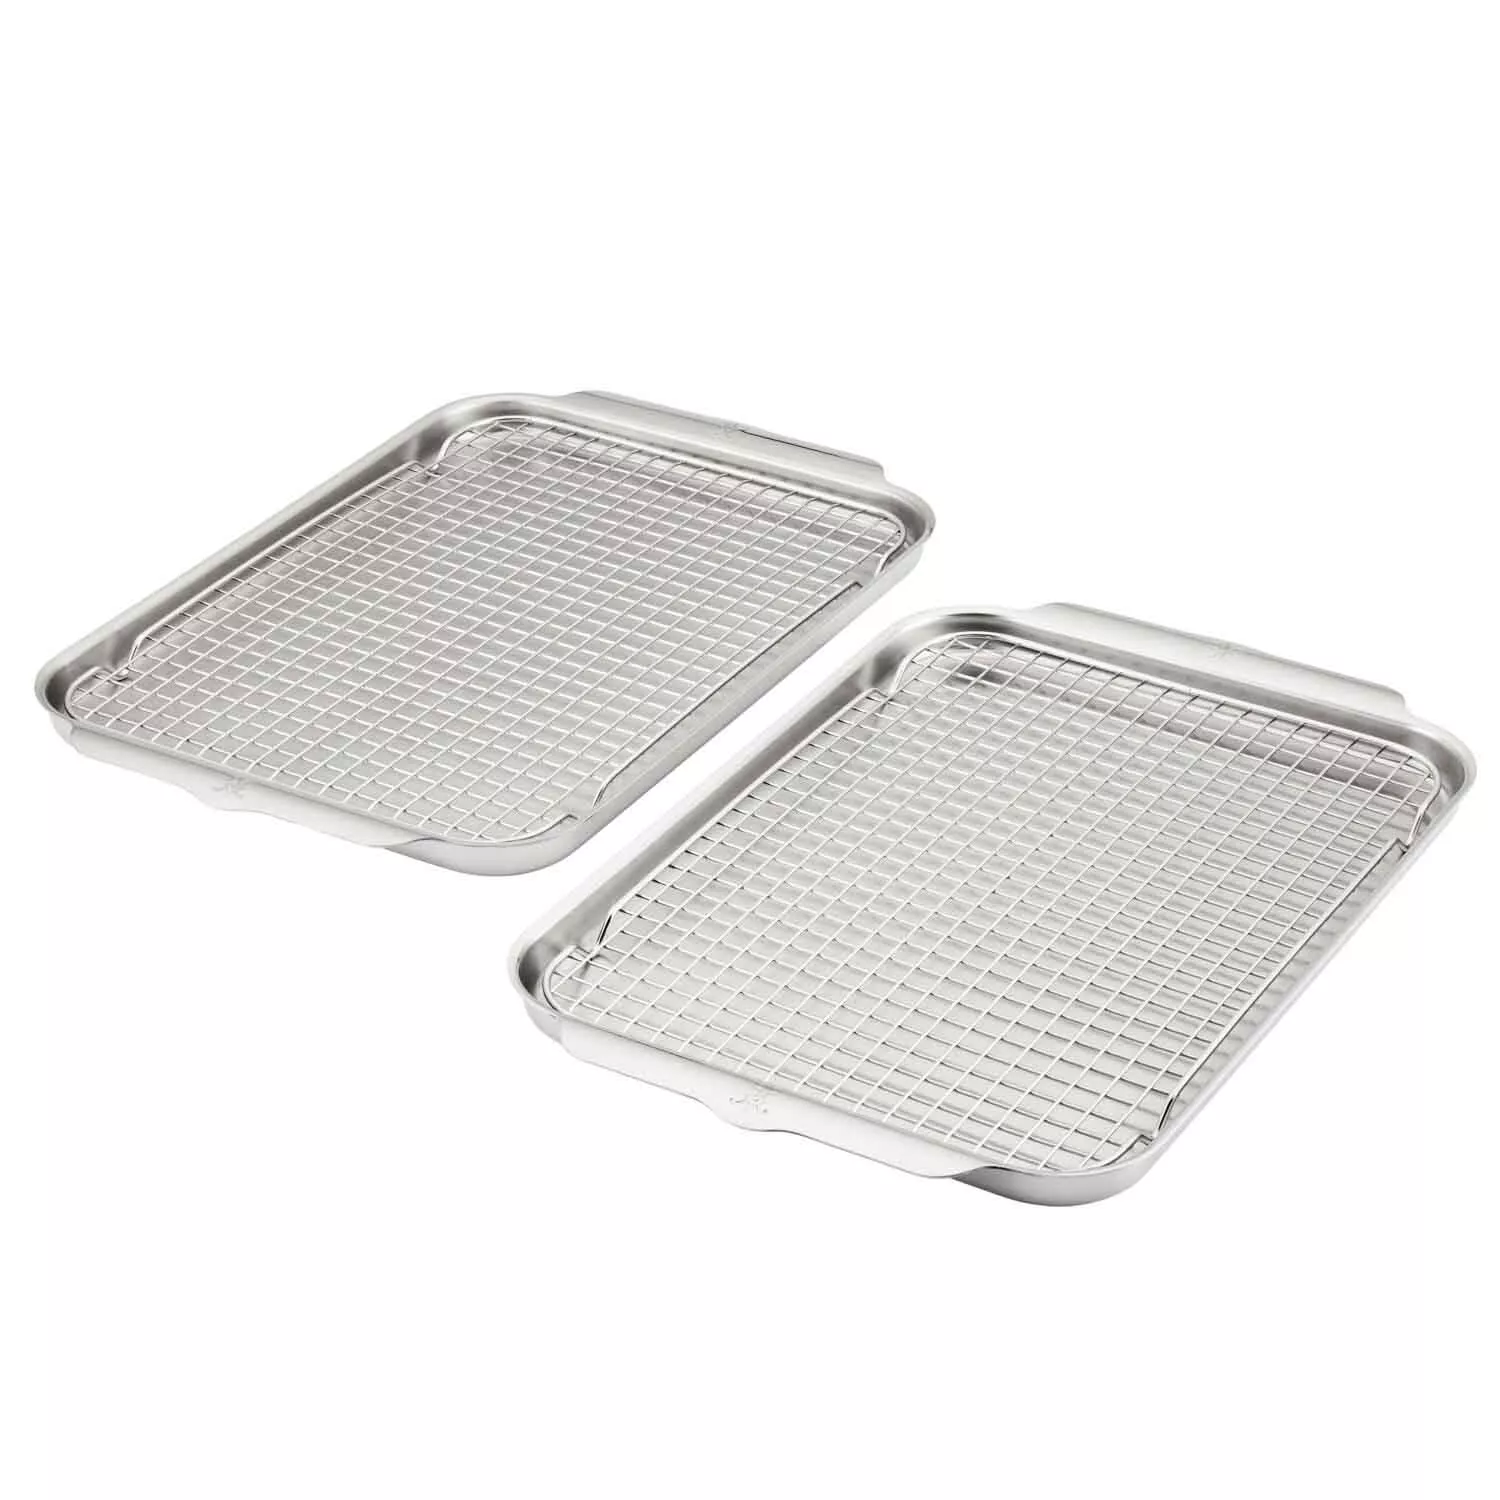 Hestan Provisions OvenBond Tri-Ply Half Sheet Pans with Rack, Set of 4